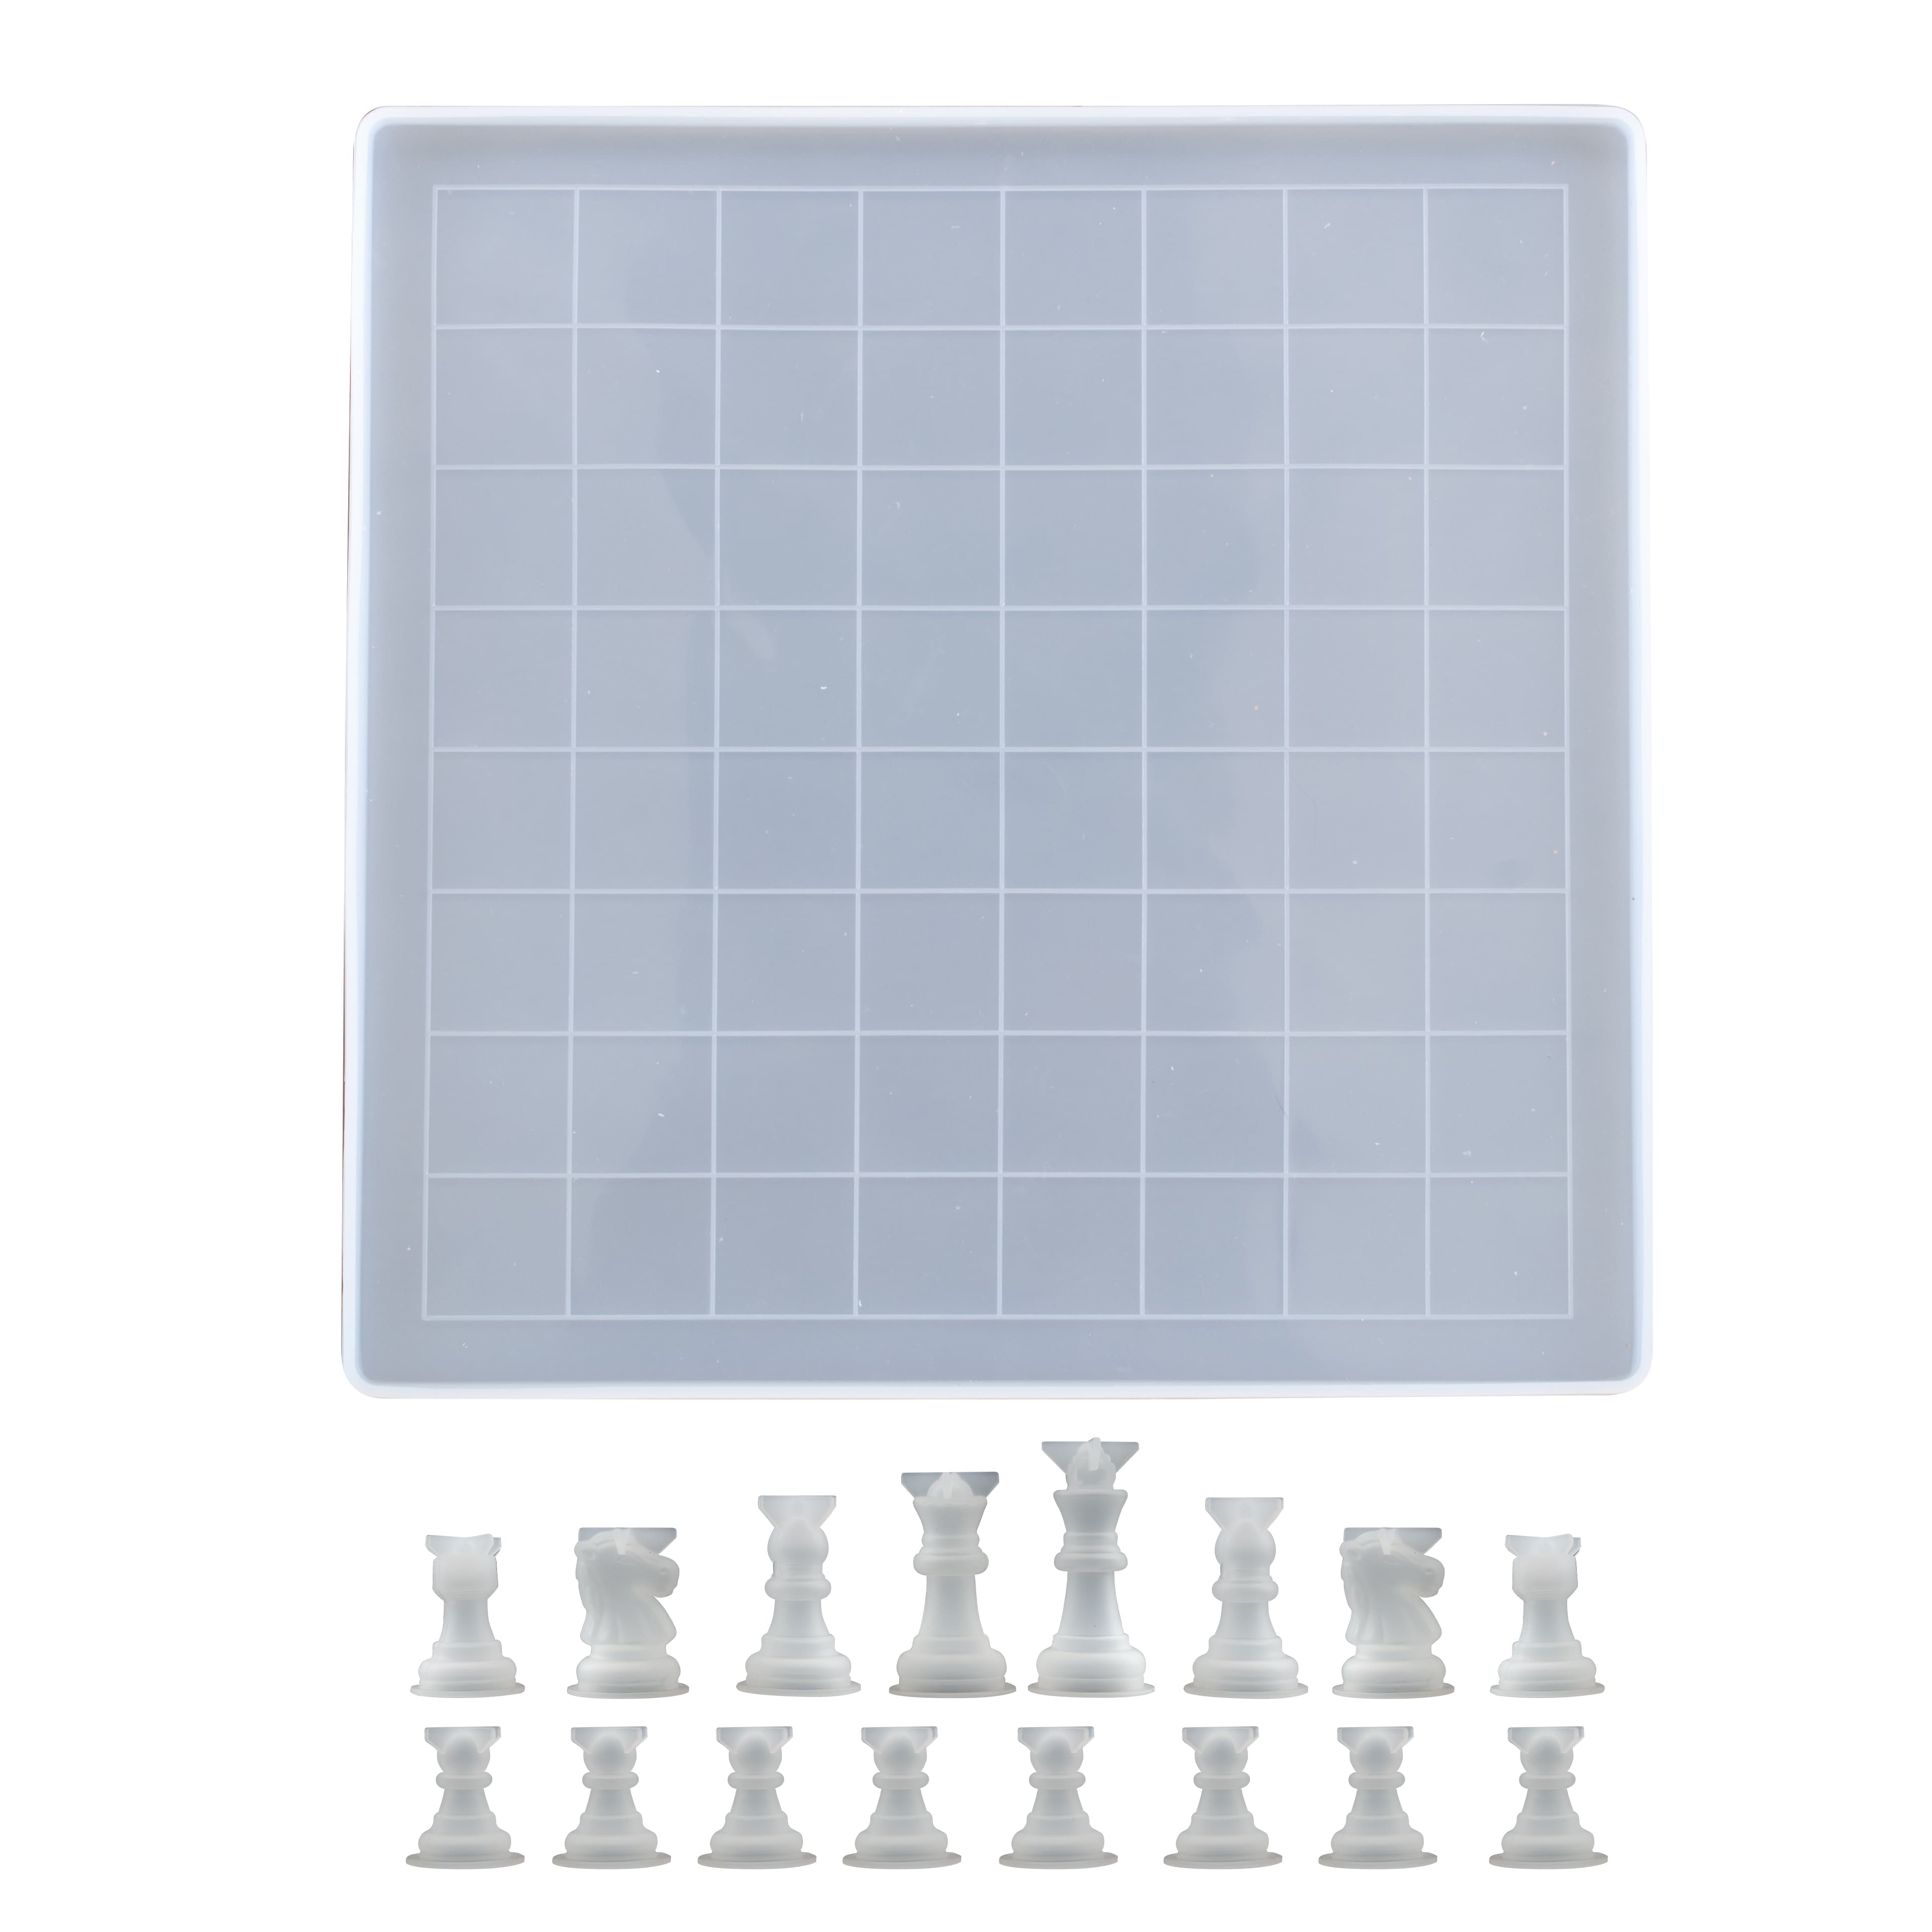 Dal  Chess Silicon Mold for sale online